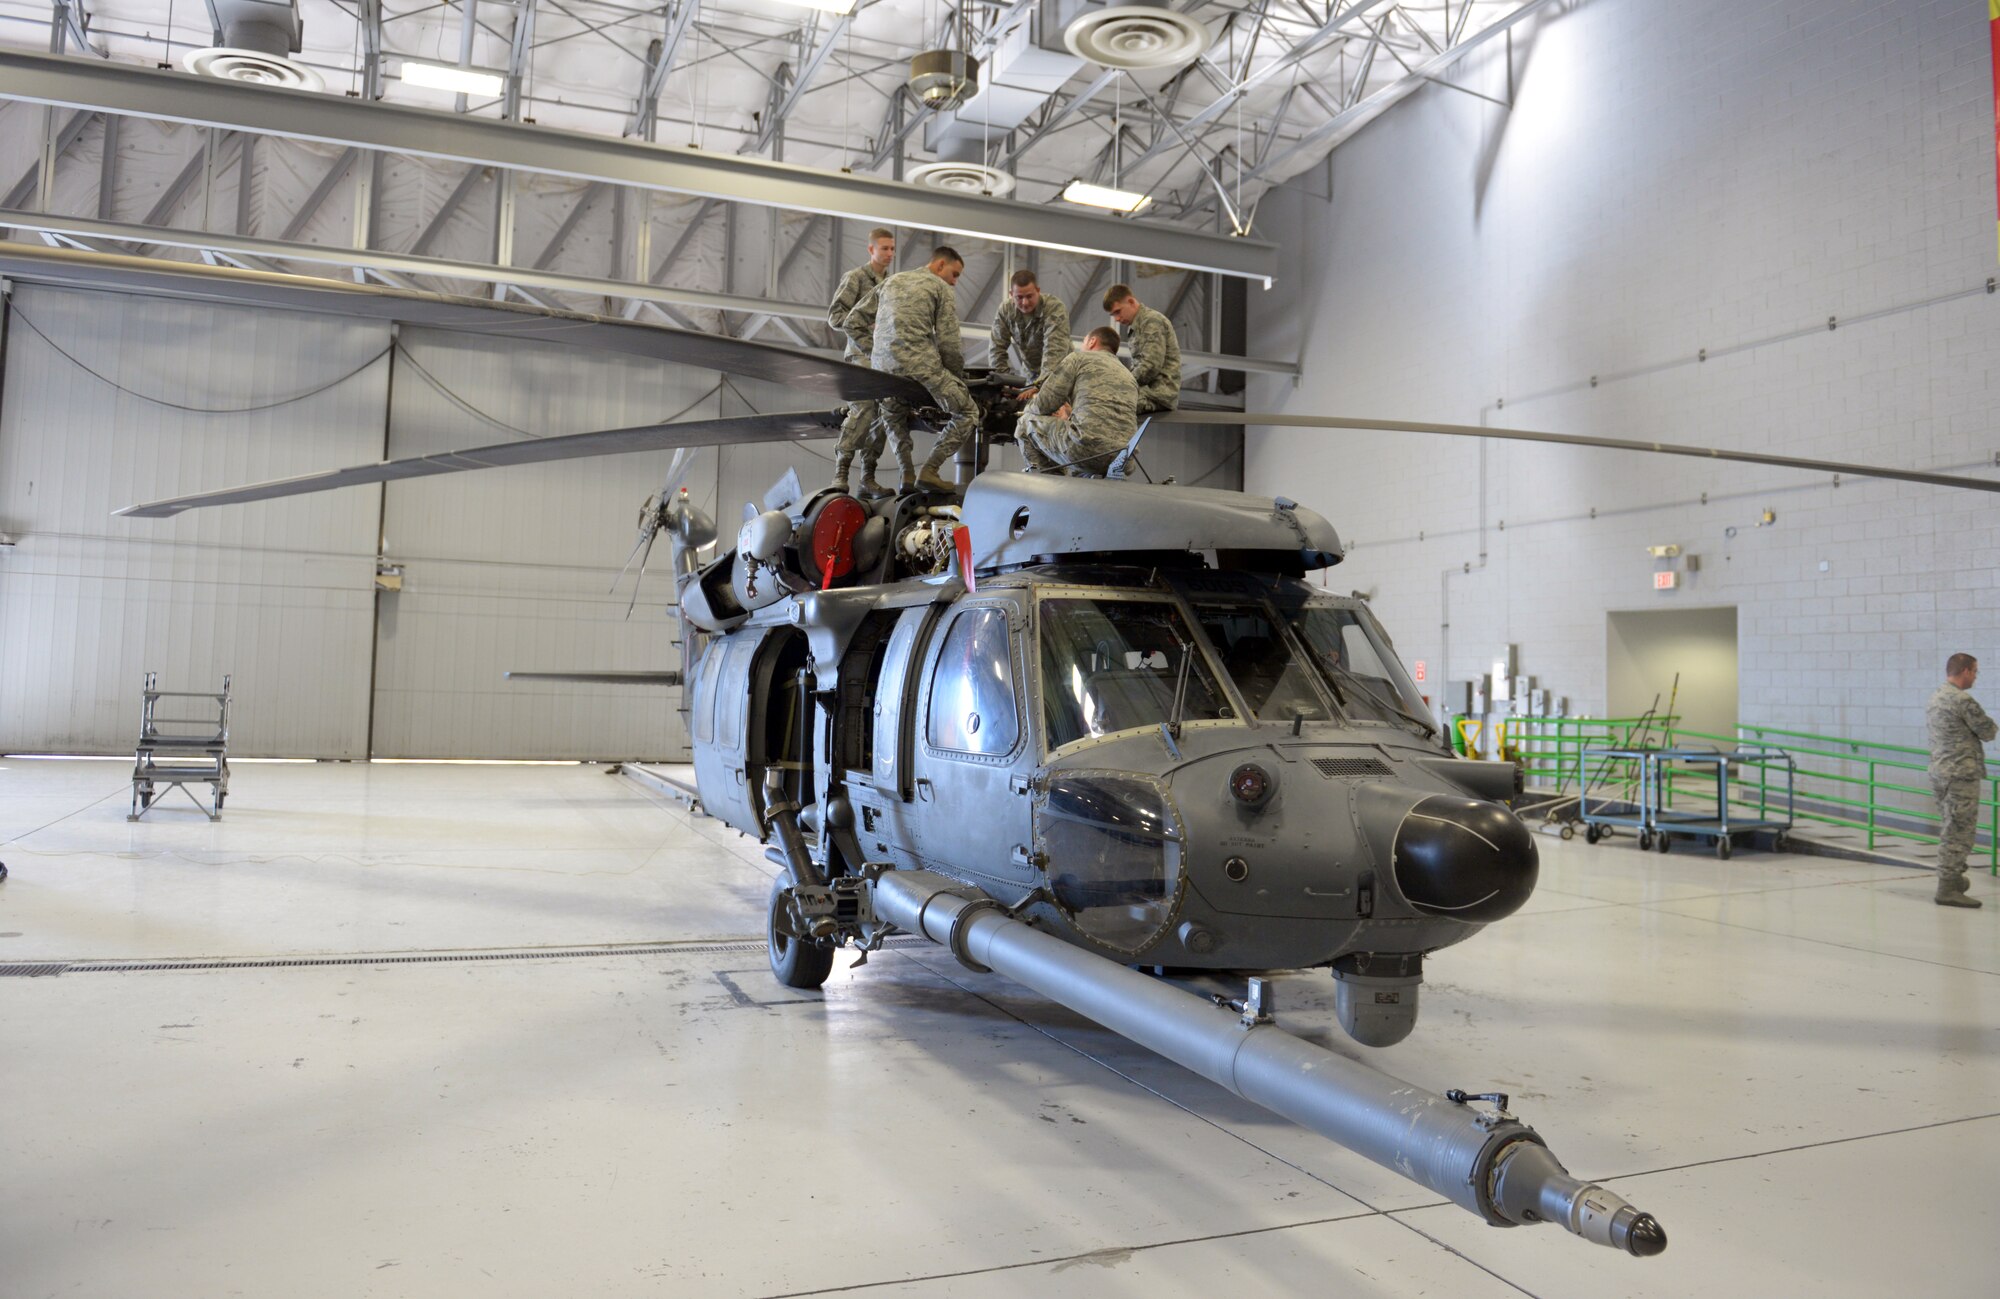 Staff Sgt. Ryan Martorella, Detachment 13, 372nd Training Squadron HH-60G Pave Hawk crew chief instructor, teaches students at the 823rd Maintenance Squadron hangar on Nellis Air Force Base, Nev., Sept. 19, 2015. Detachment 13 is Nellis and Creech AFB’s primary technical training source for aircraft maintenance training. (U.S. Air Force photo by Airman 1st Class Rachel Loftis)